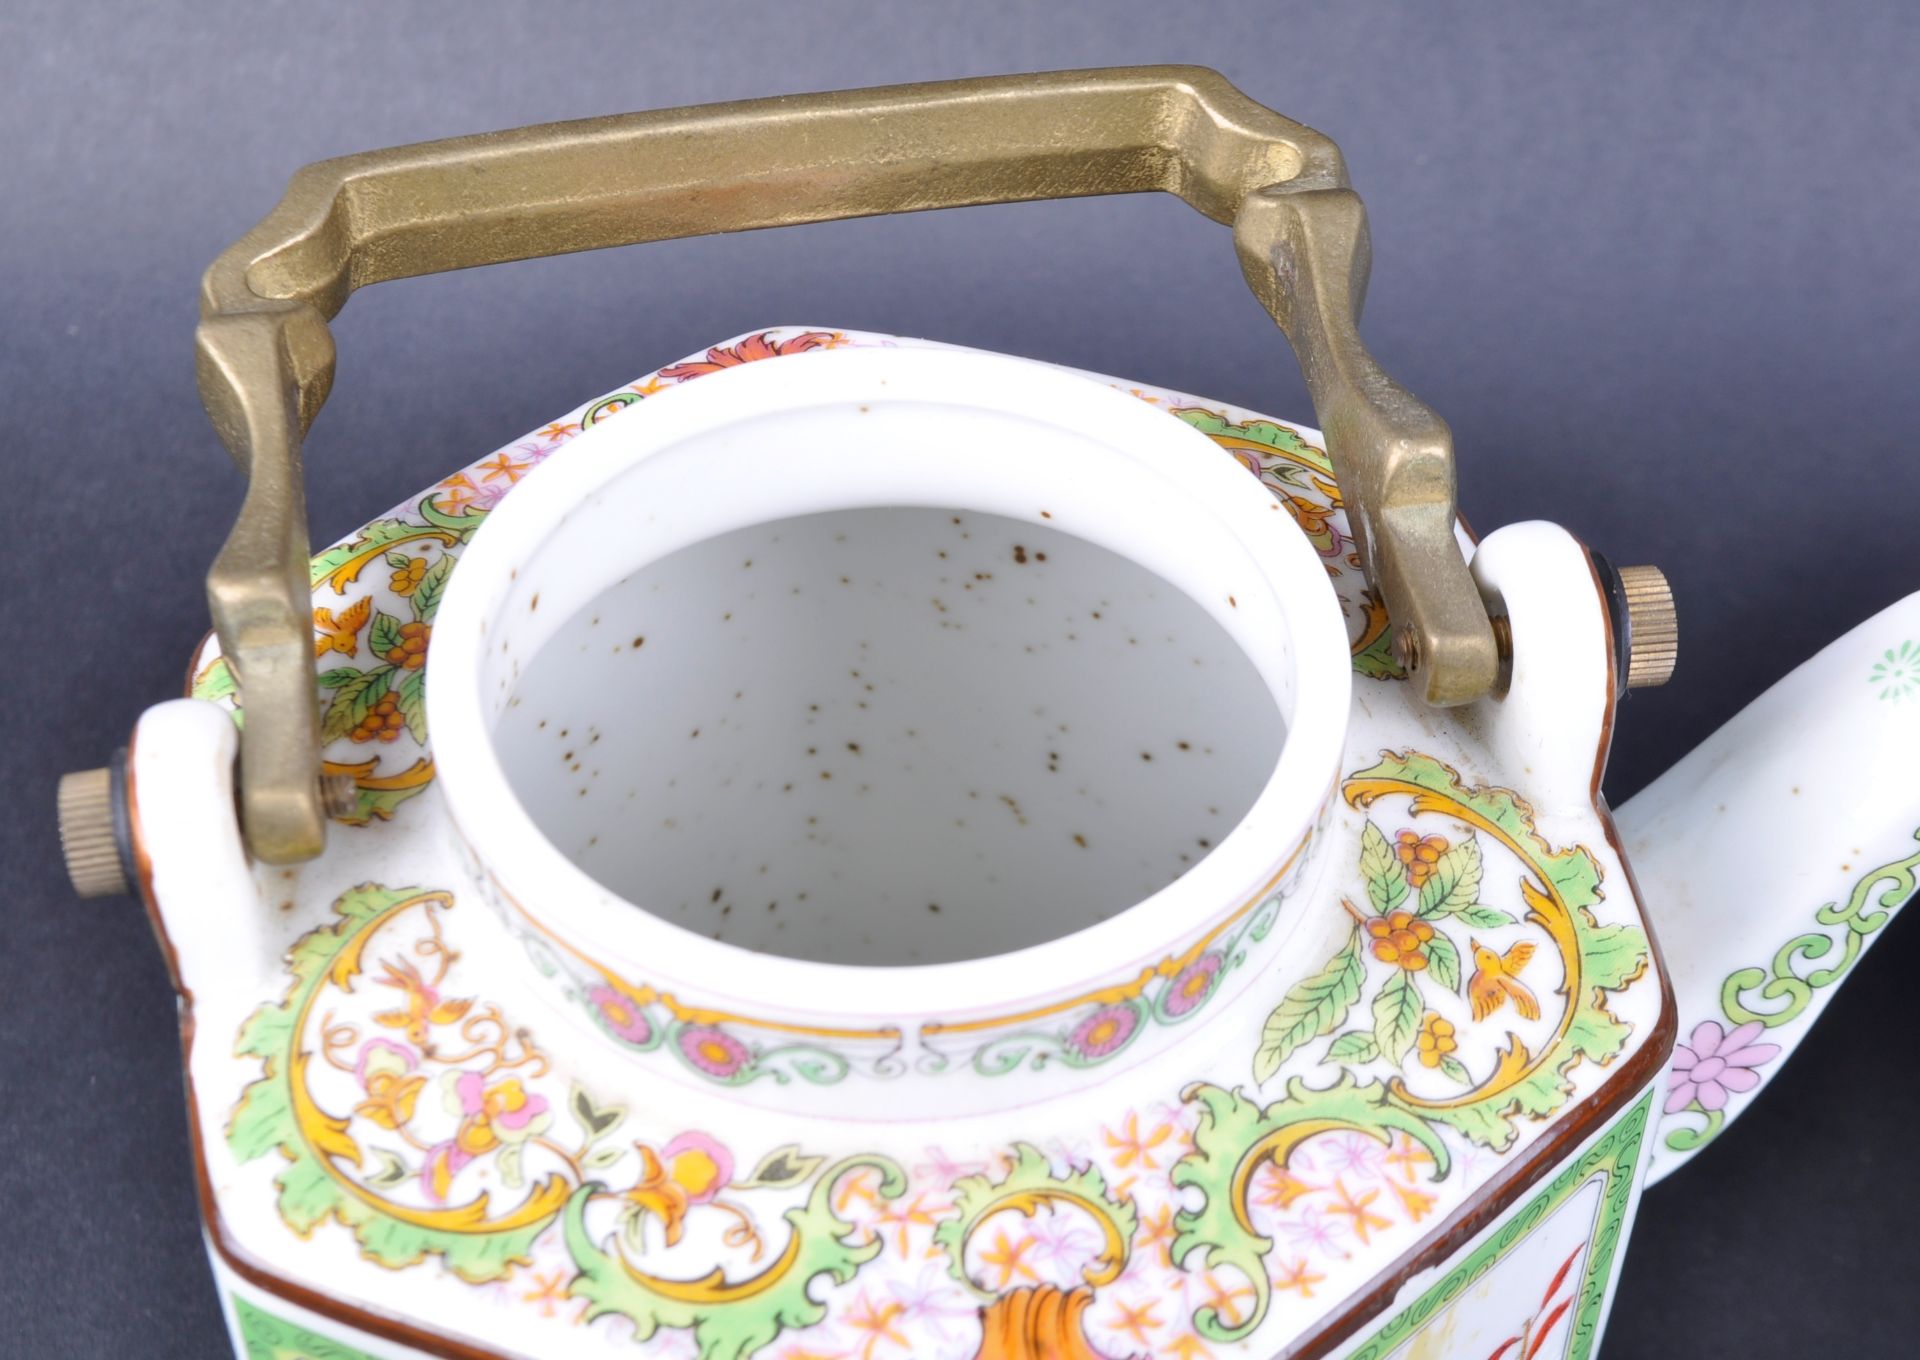 EARLY 20TH CENTURY CHINESE PORCELAIN TEA CADDY & TEAPOT - Image 9 of 10